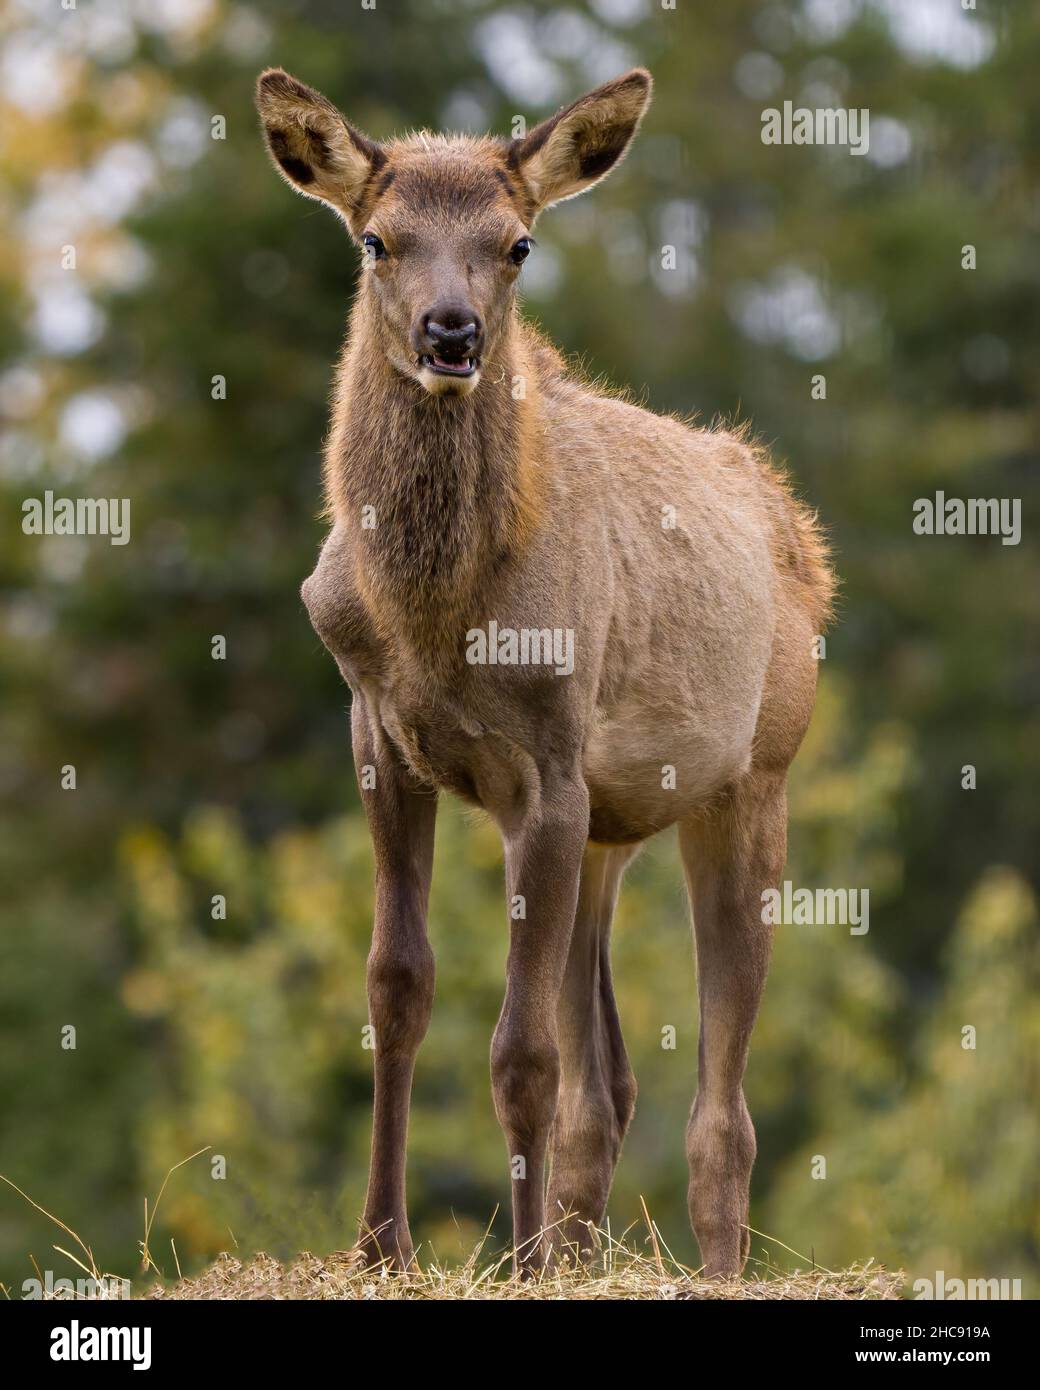 Elk young animal close-up profile view looking at camera with a blur background in its environment and habitat surrounding. Stock Photo